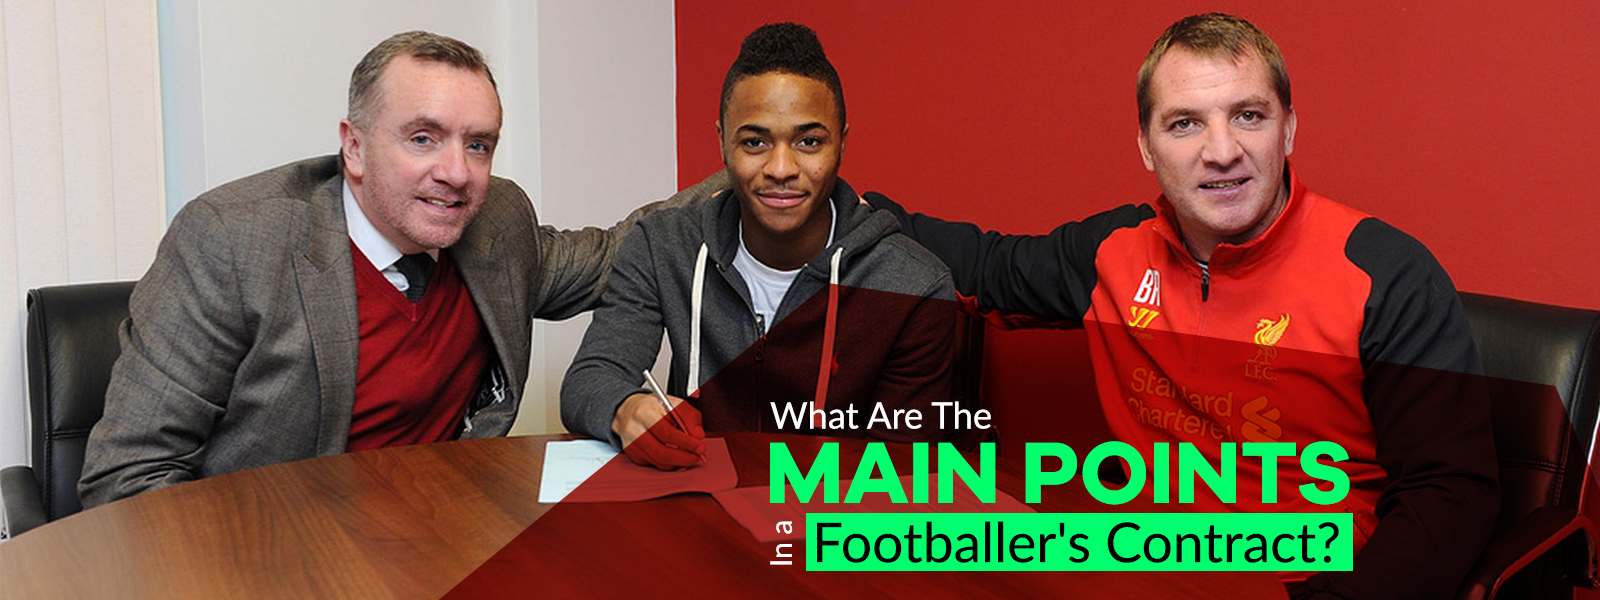 What Are The Main Points In A Footballer Contract?